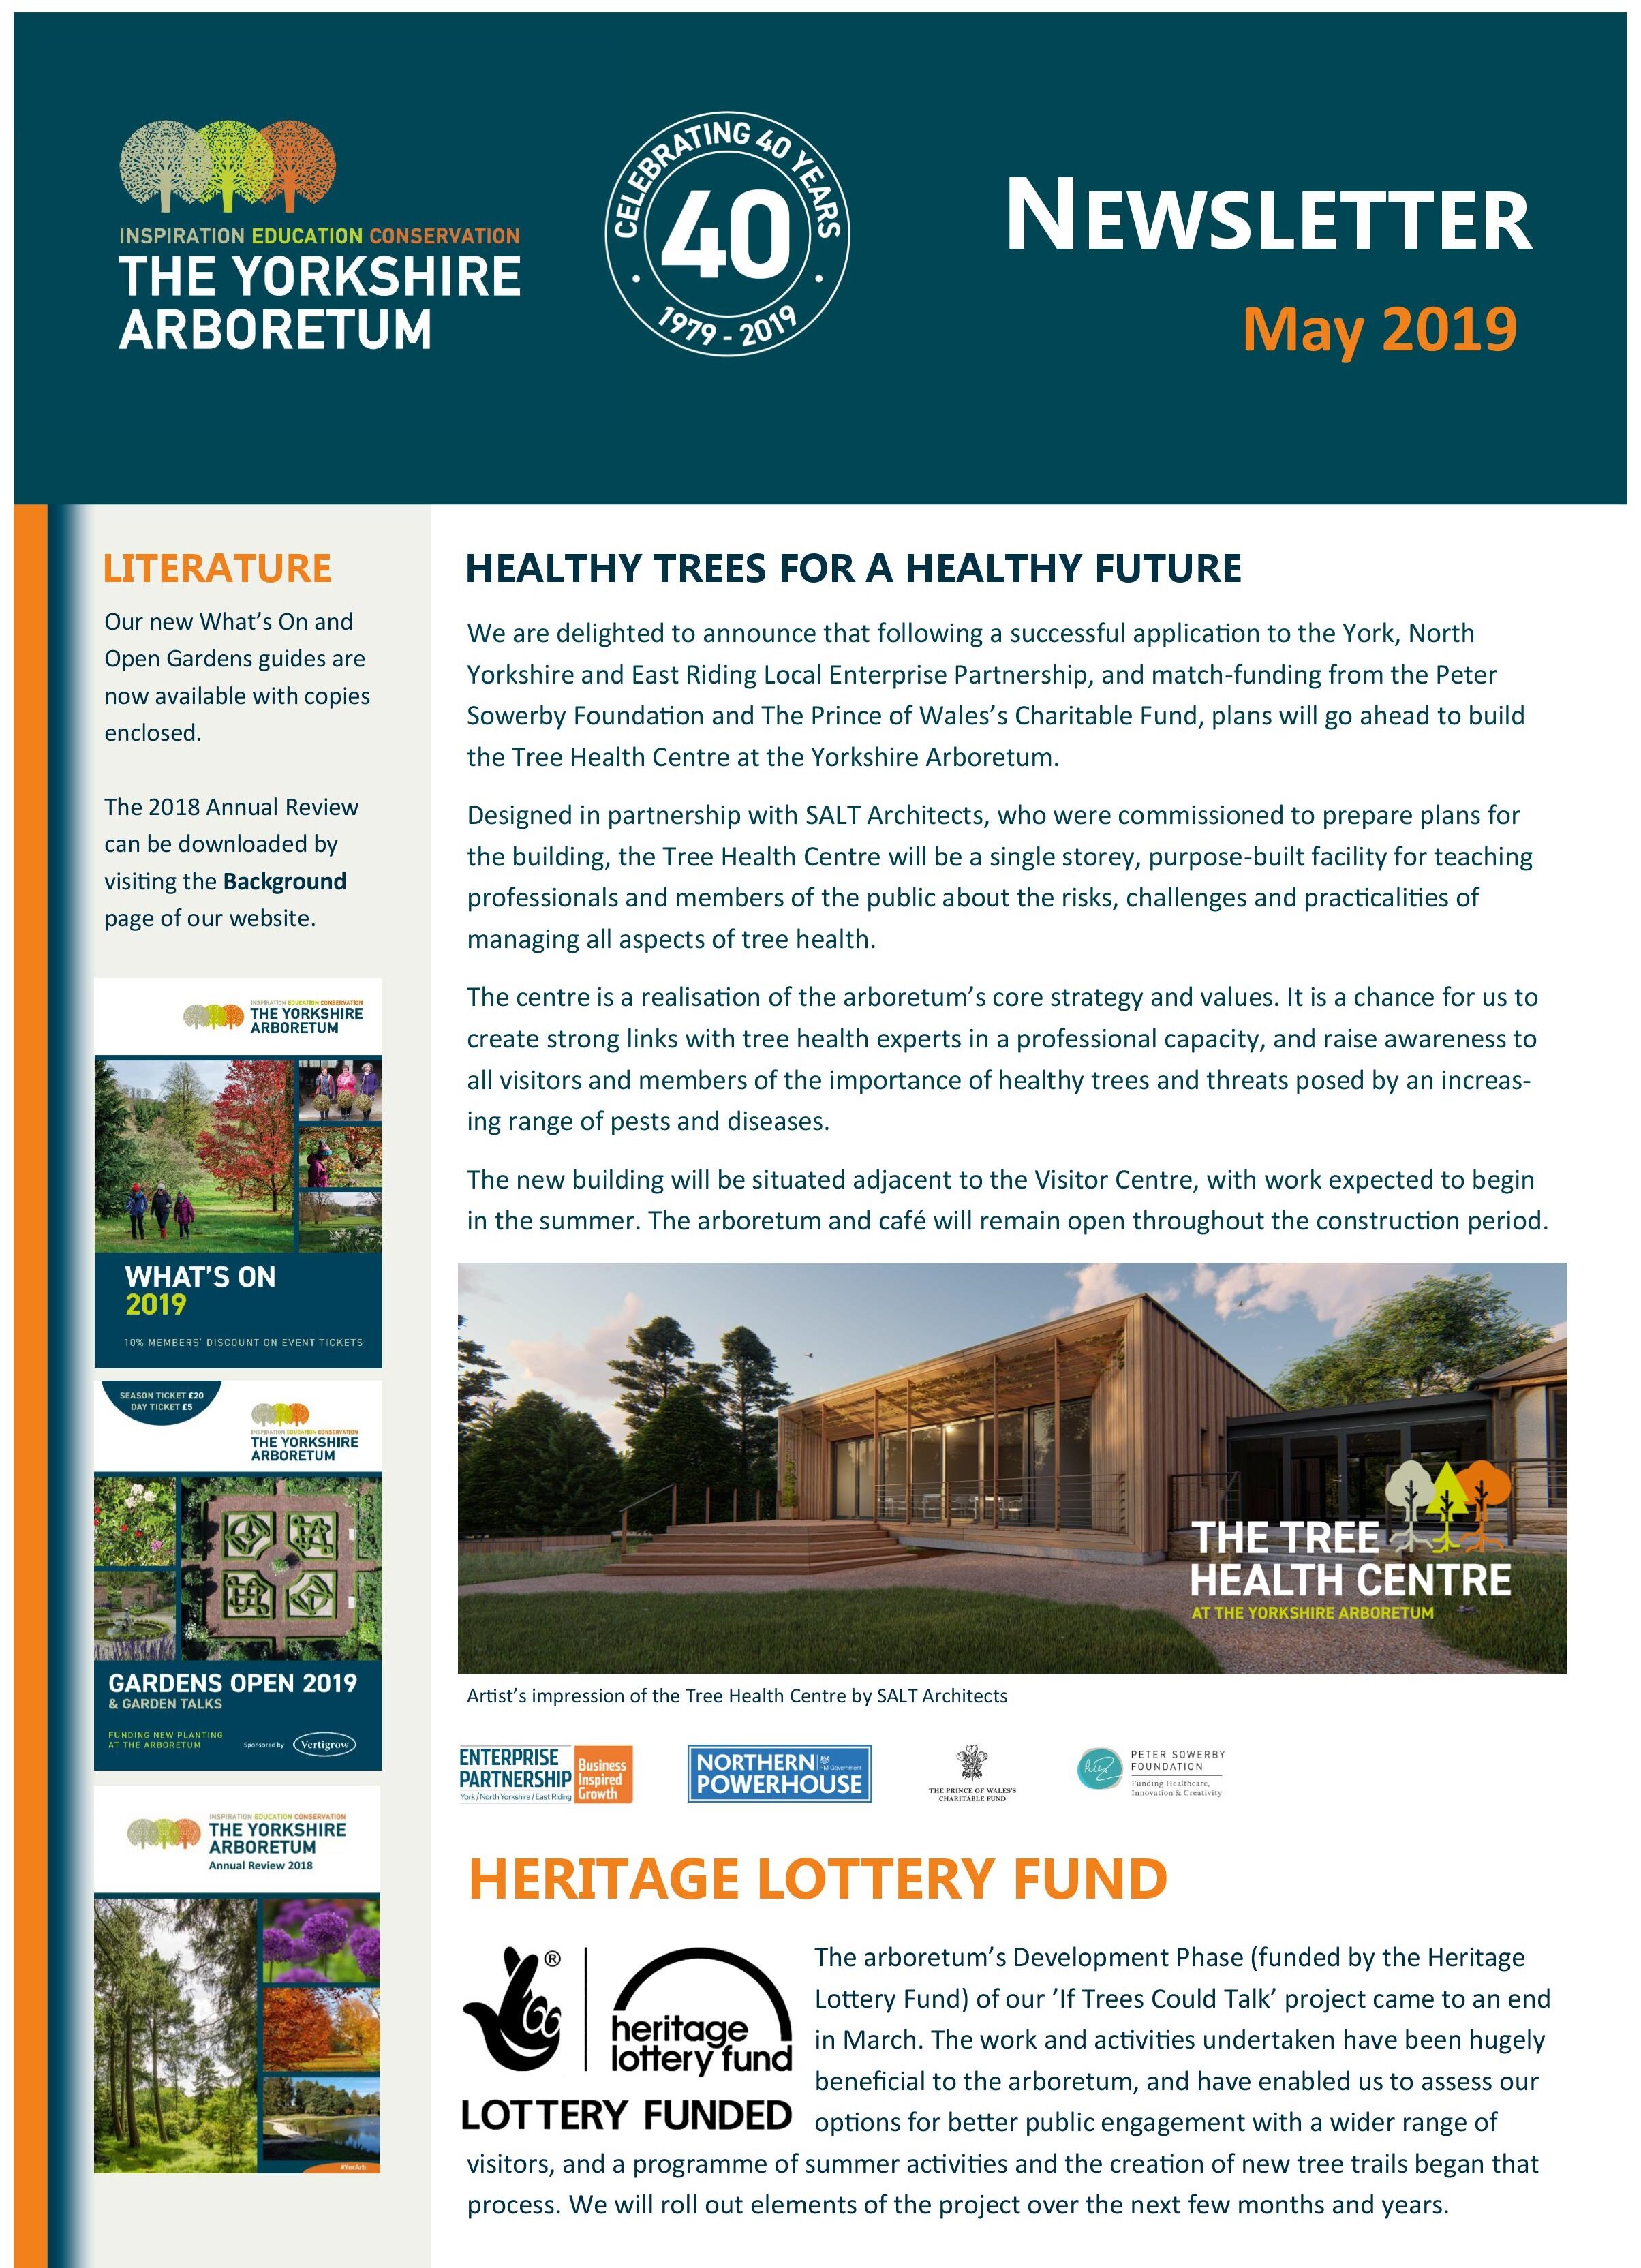 Issue 10 - May 2019